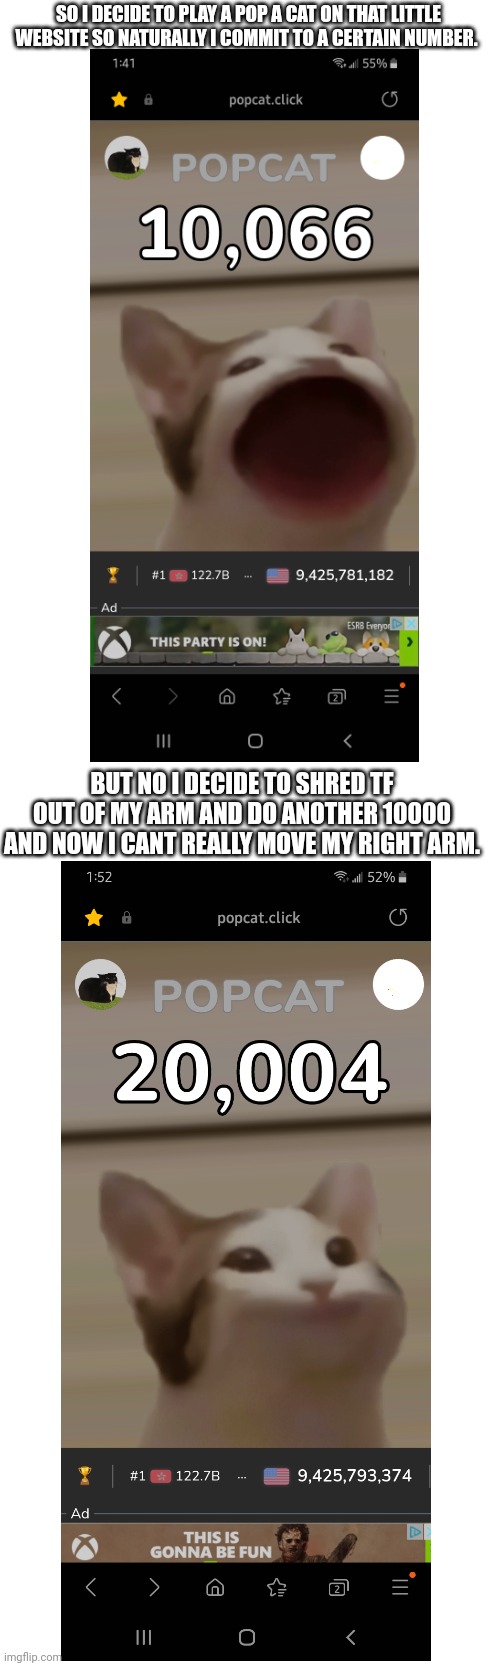 Pop a cat | SO I DECIDE TO PLAY A POP A CAT ON THAT LITTLE WEBSITE SO NATURALLY I COMMIT TO A CERTAIN NUMBER. BUT NO I DECIDE TO SHRED TF OUT OF MY ARM AND DO ANOTHER 10000 AND NOW I CANT REALLY MOVE MY RIGHT ARM. | image tagged in who reads these | made w/ Imgflip meme maker